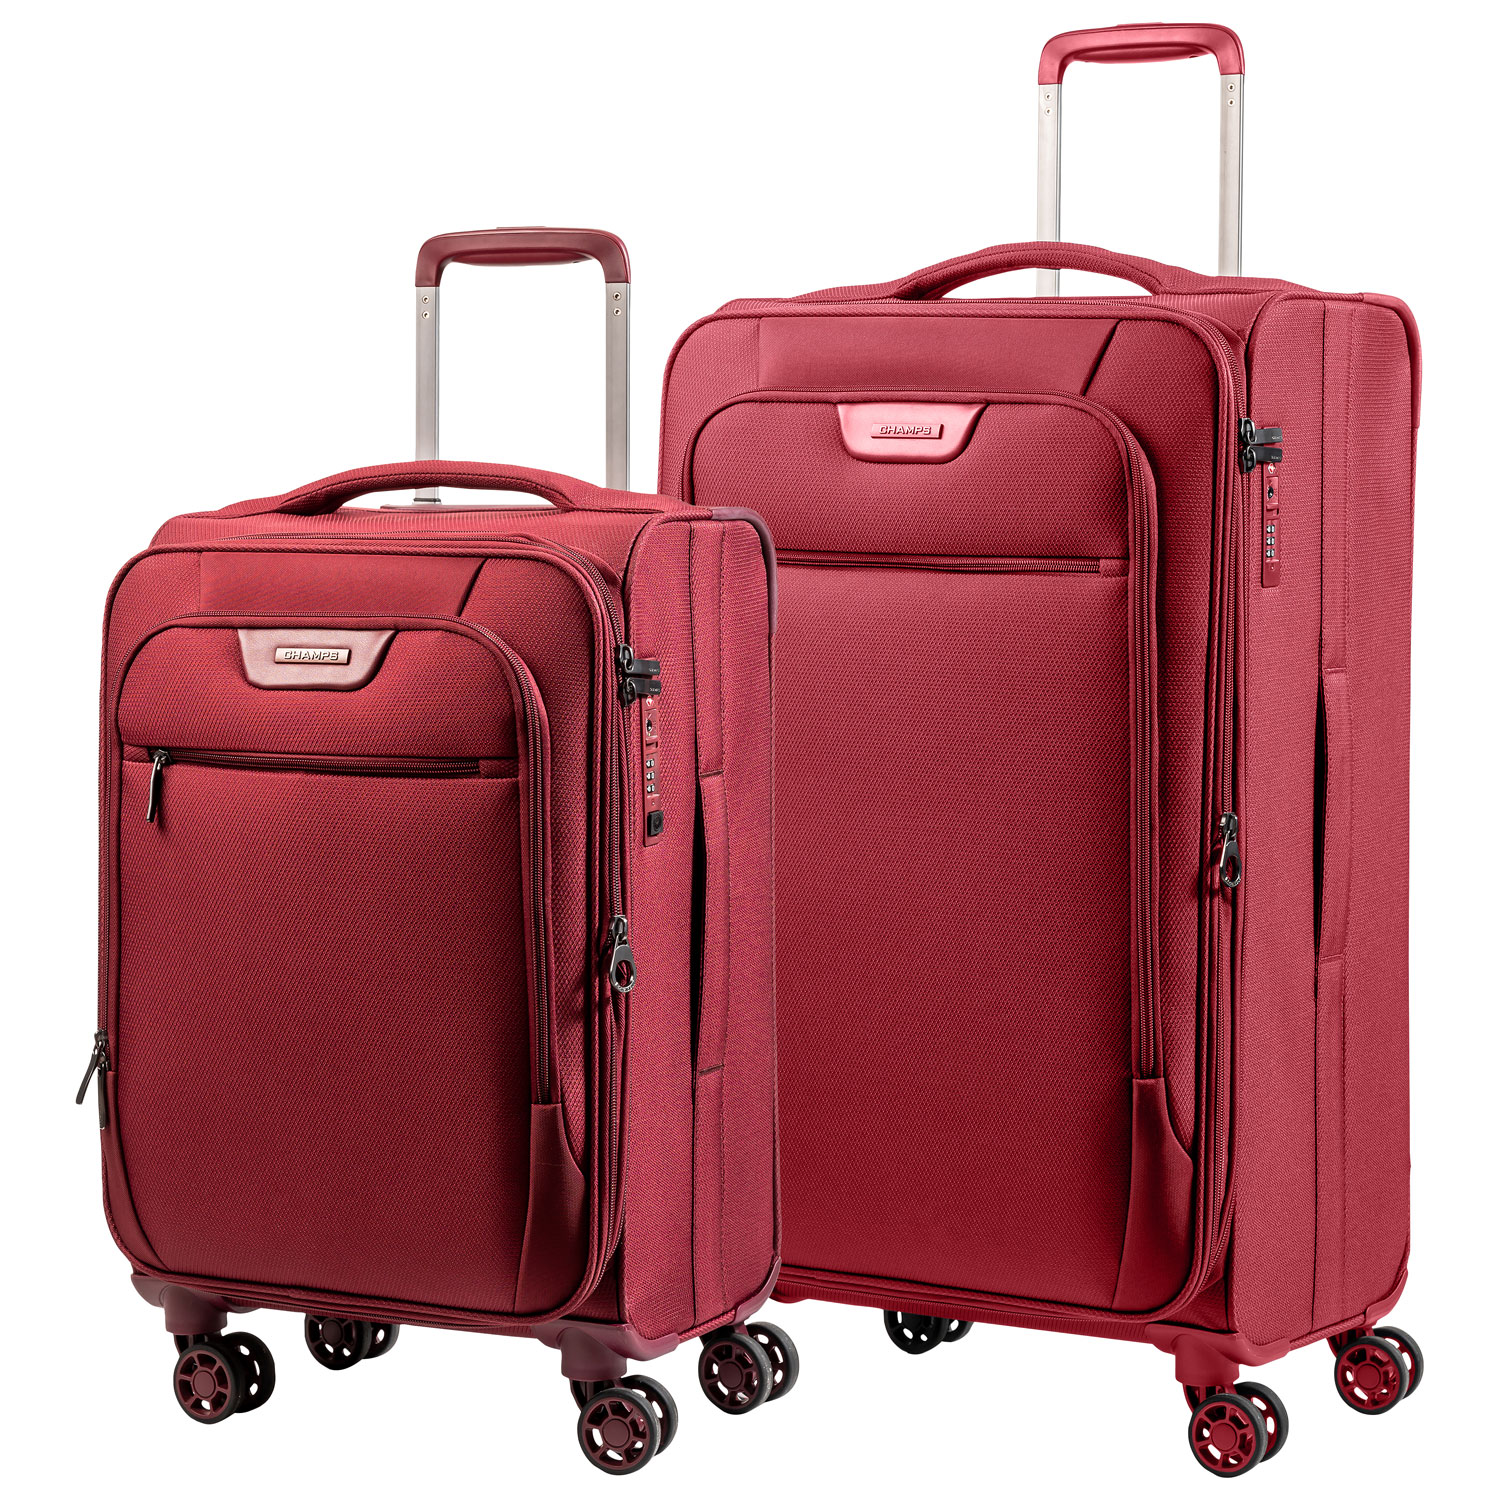 Roots red carry-on luggage with wheels, Roots Canada red suitcase with ...